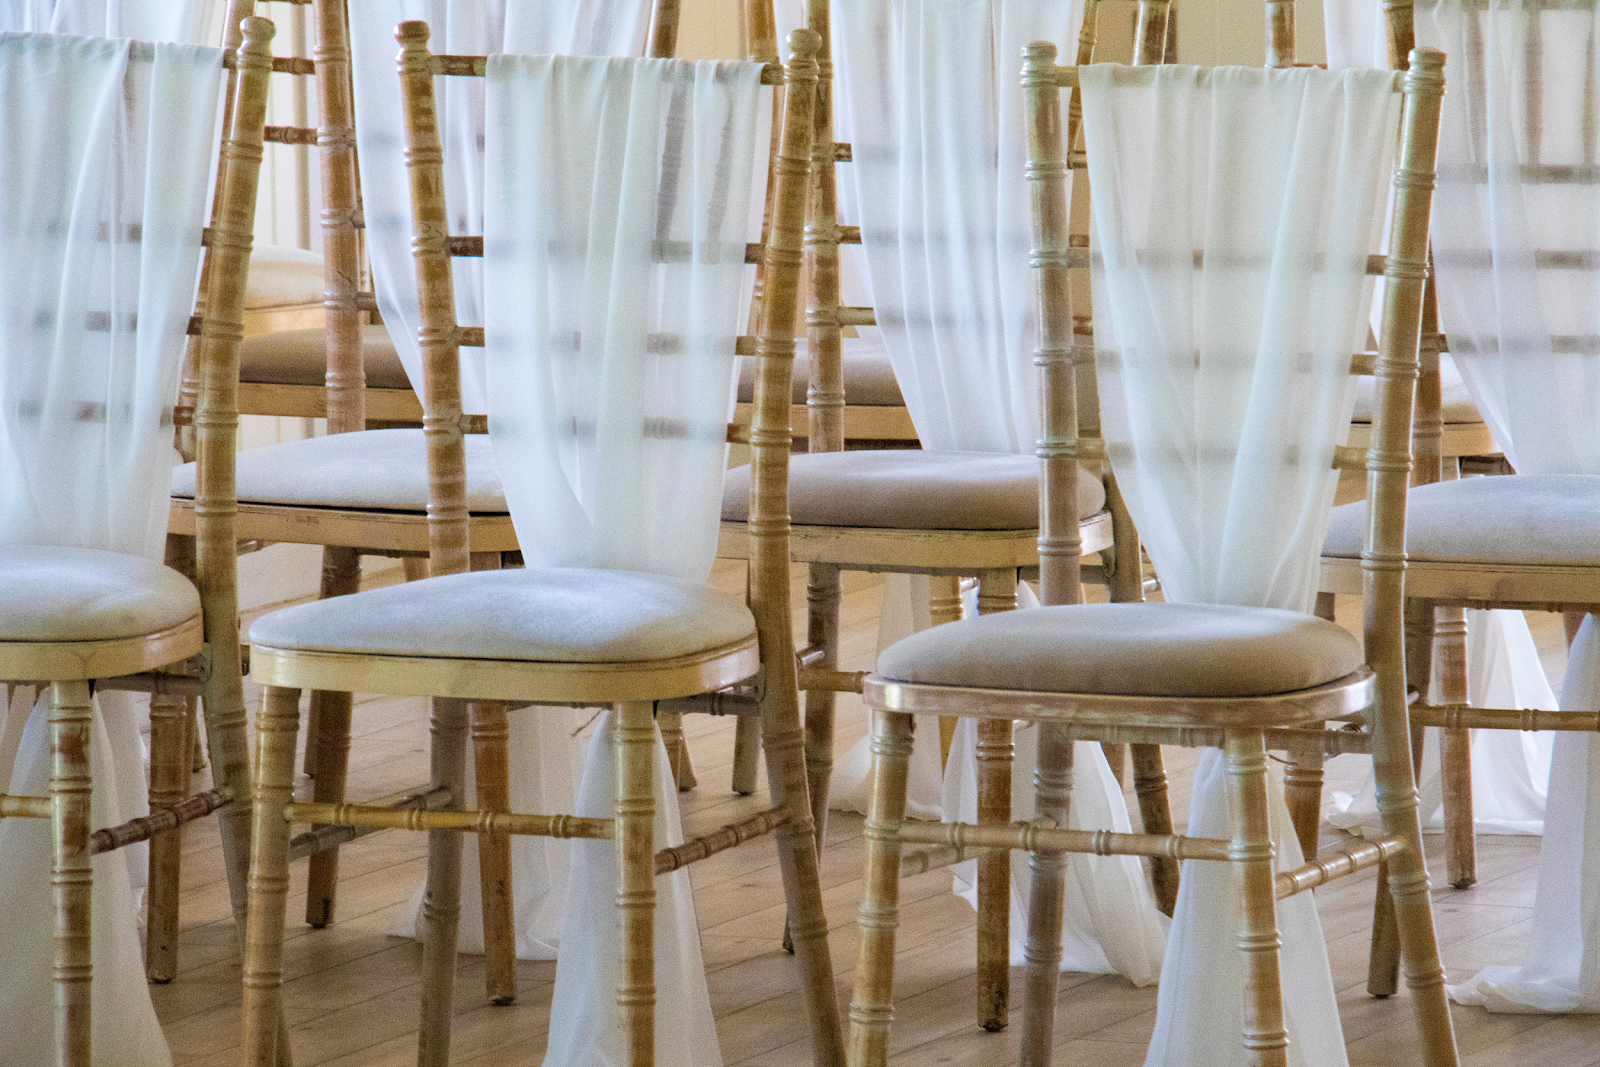 Ways To Decorate Wedding Chairs Lovely Day Events